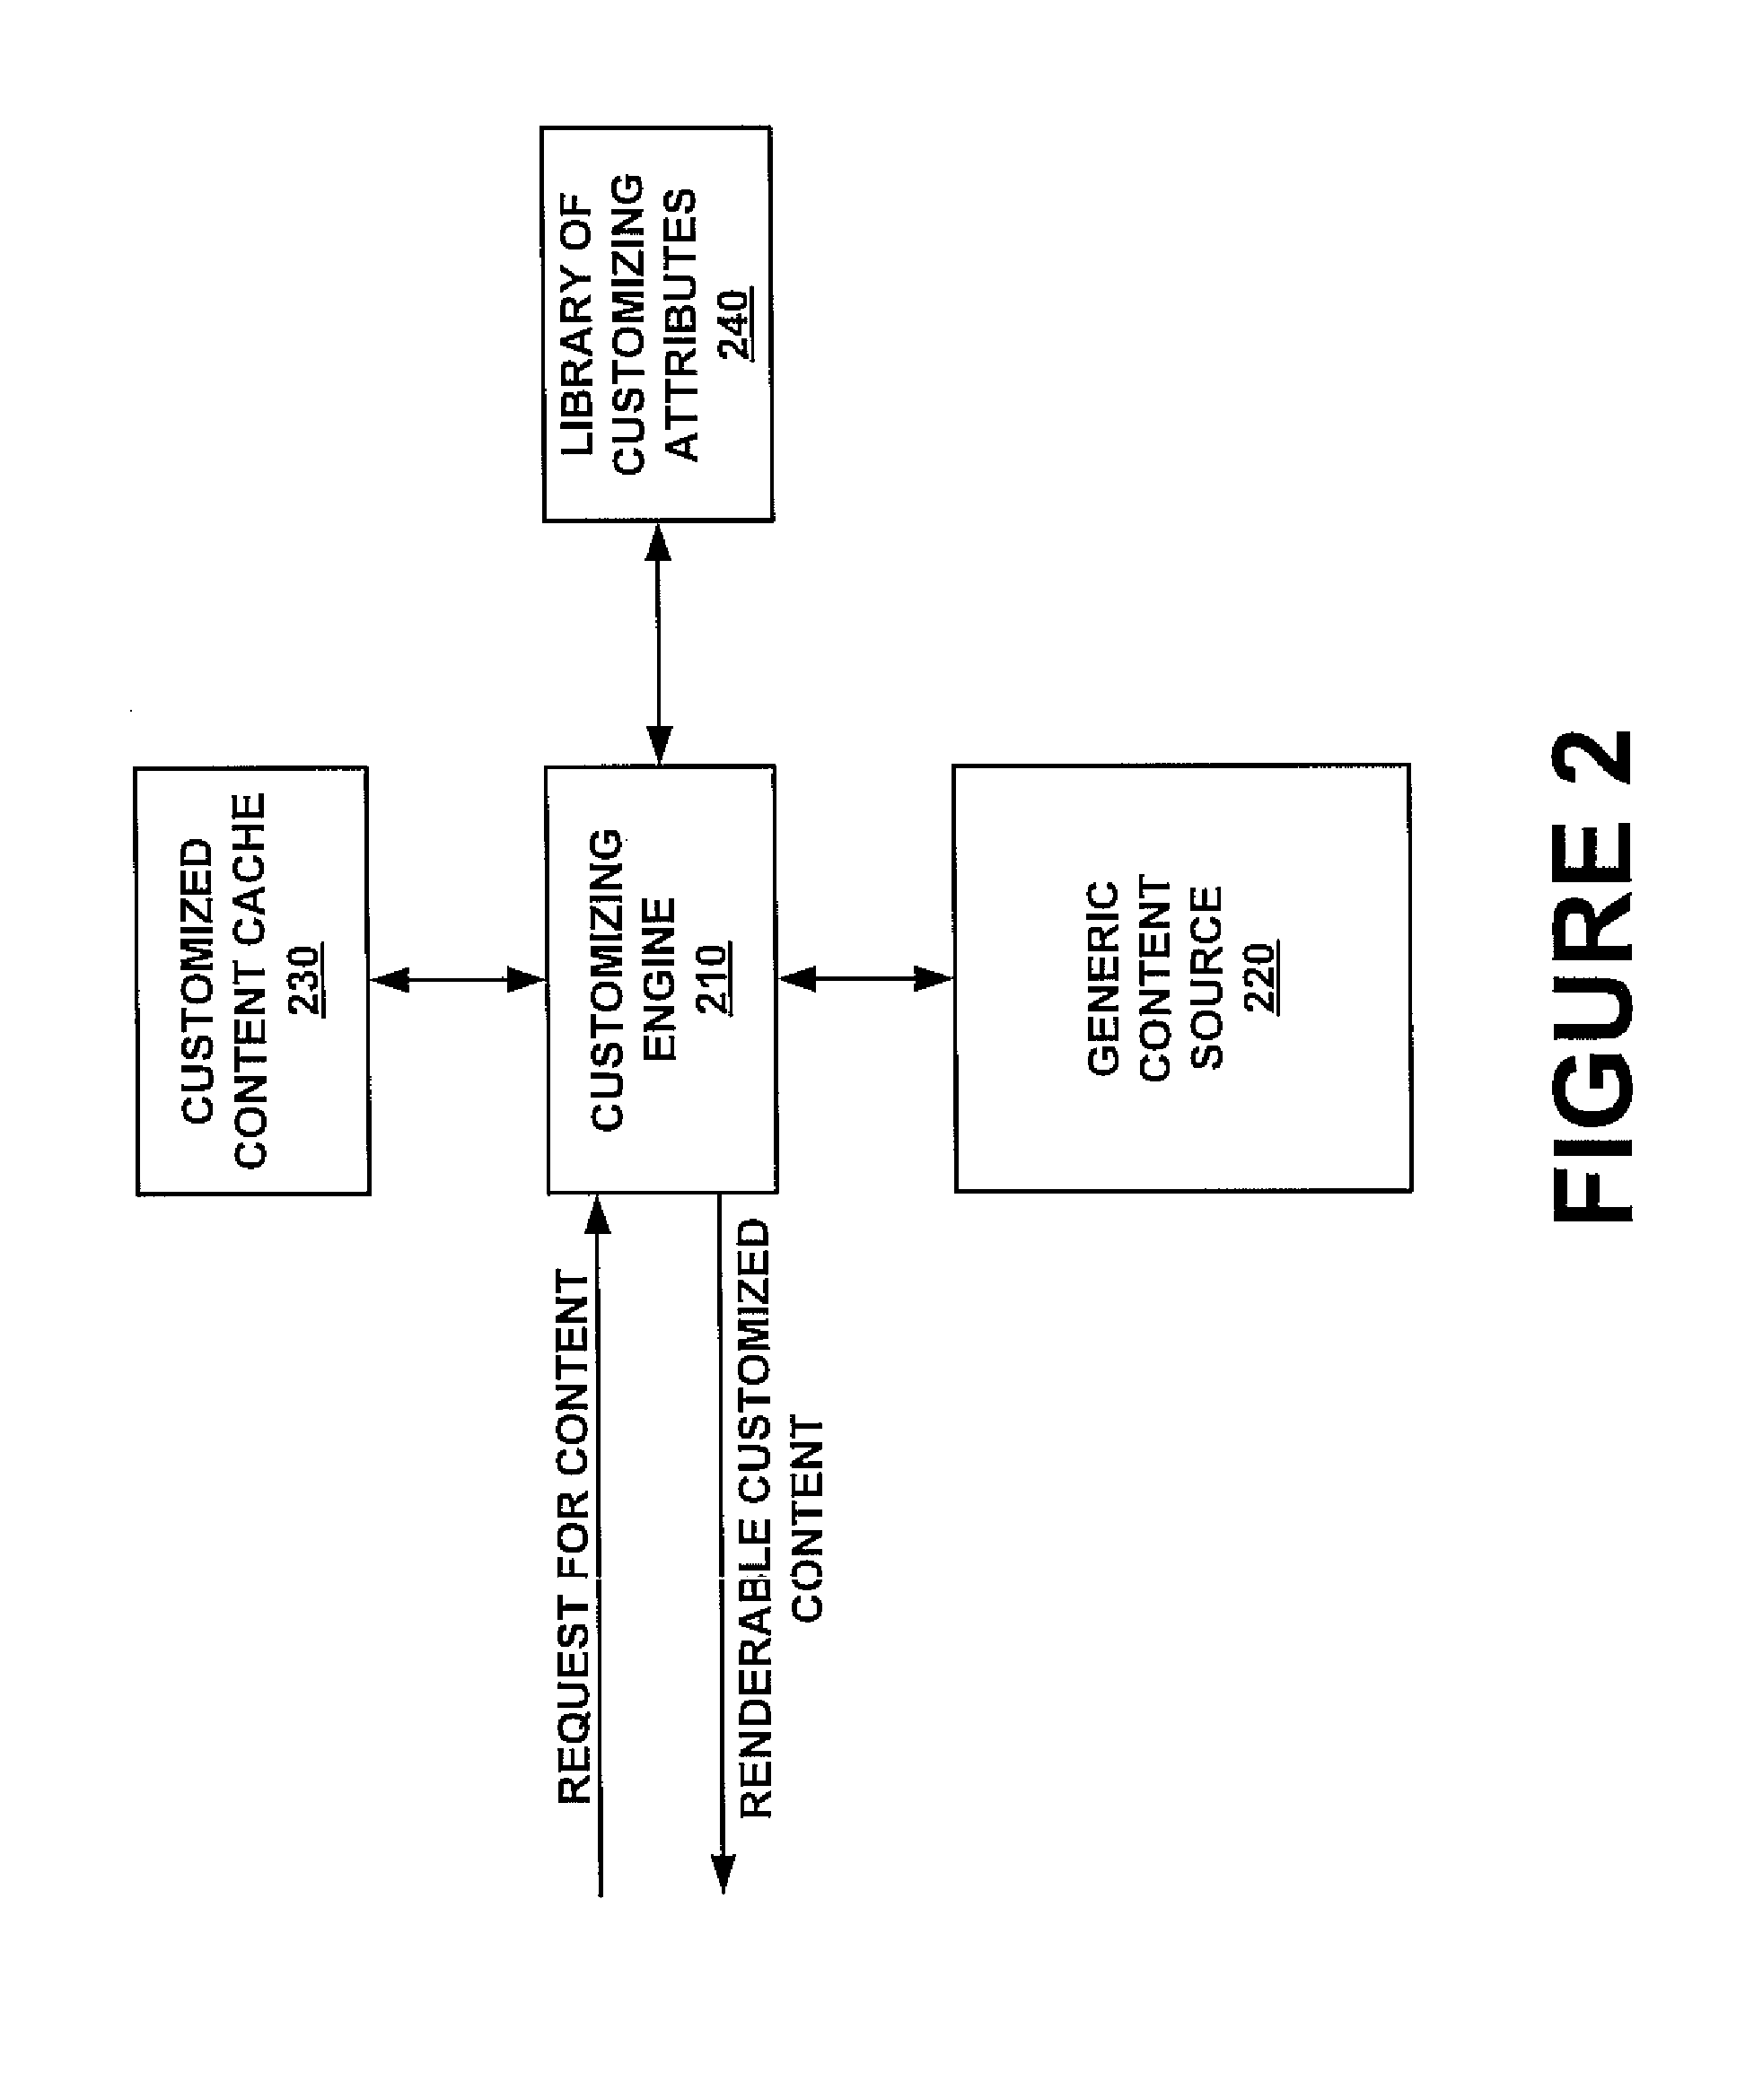 Method and system for customizing content on a server for rendering on a wireless device